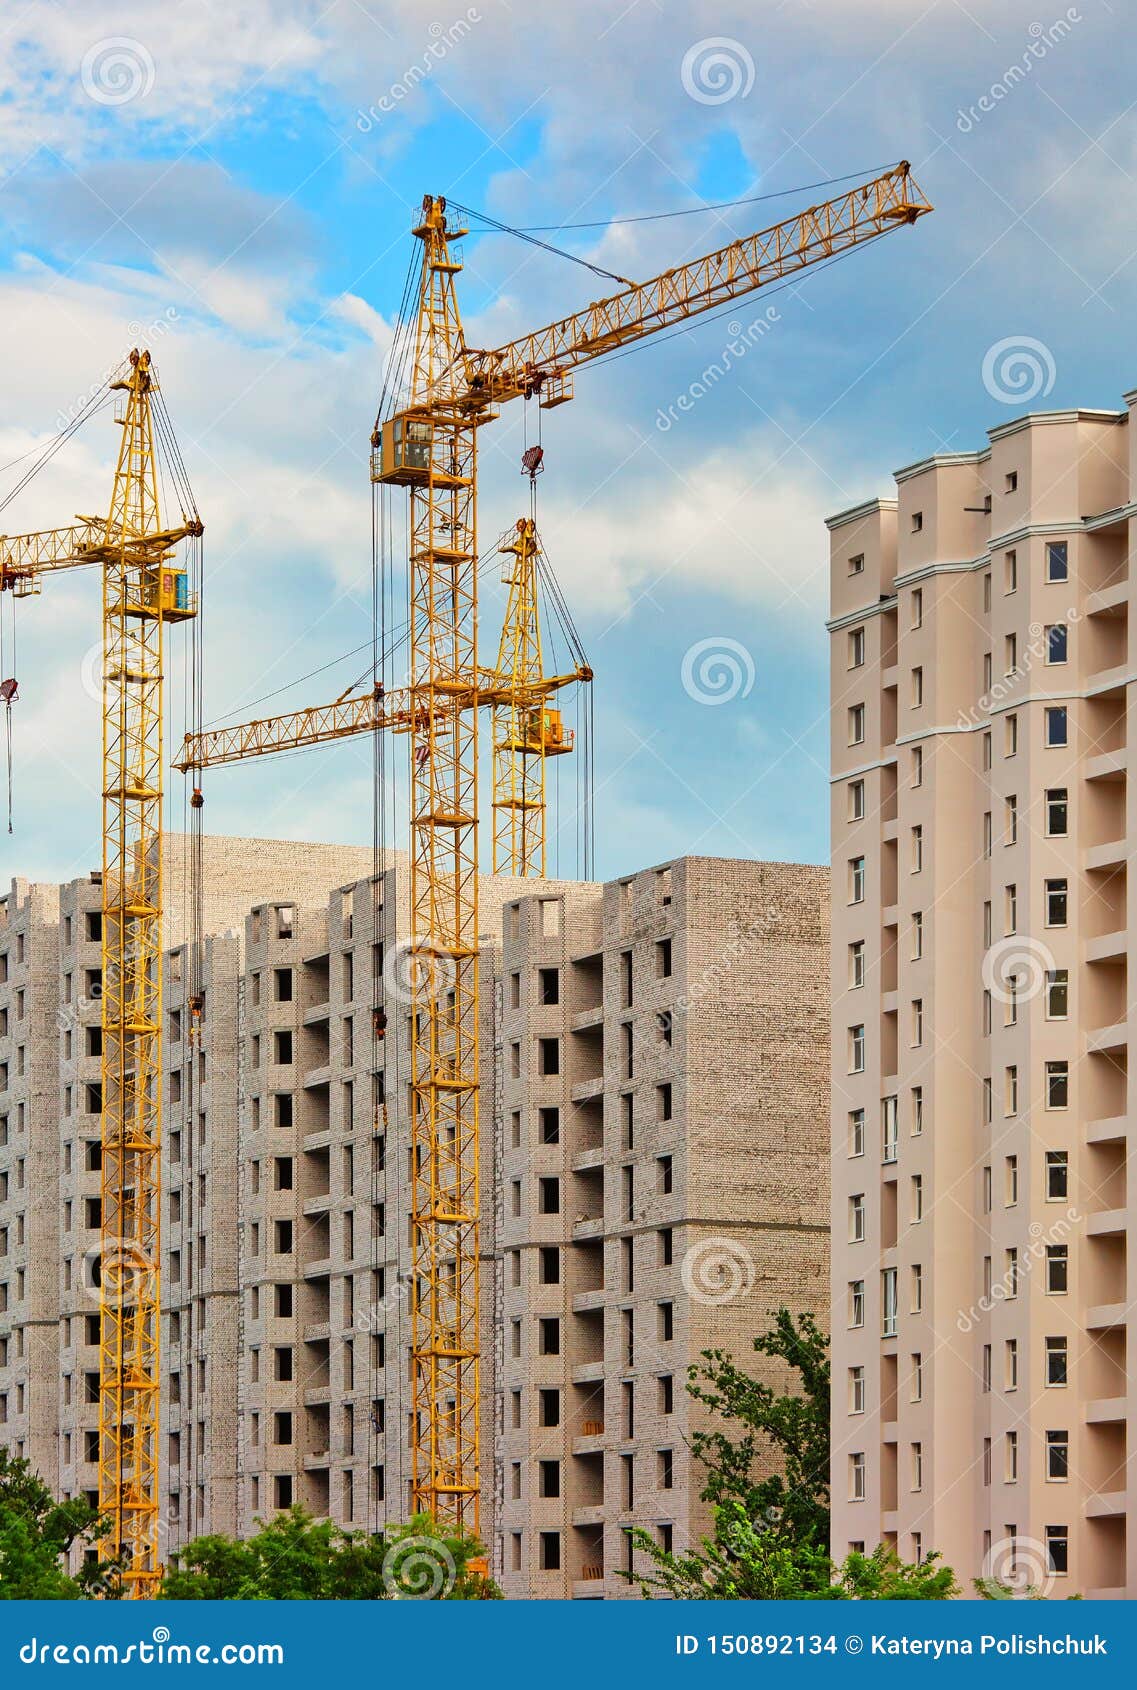  Construction  Site  With Cranes Urban Background  Stock 